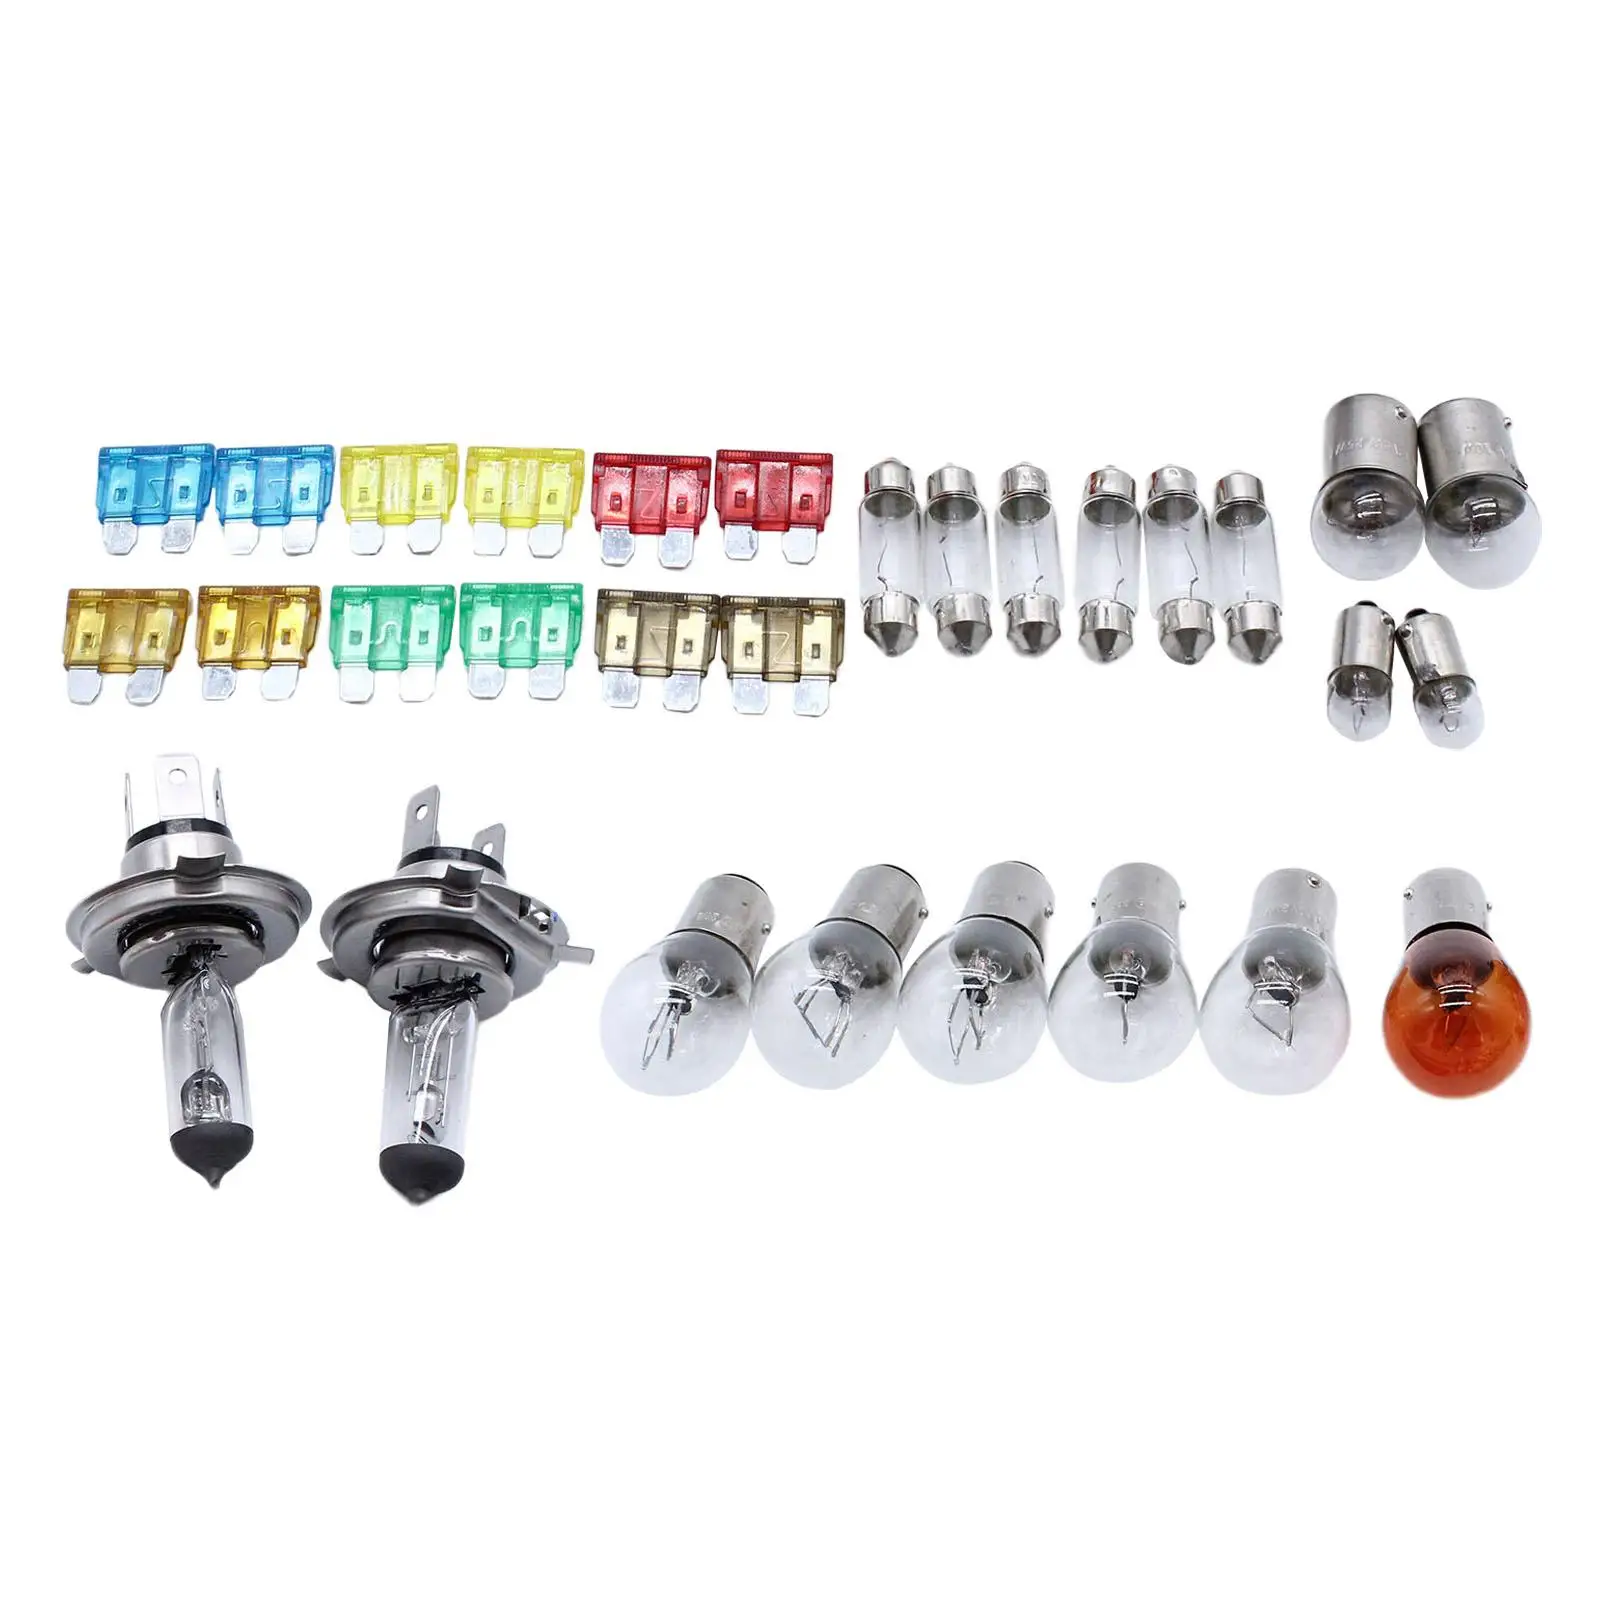 30 Pieces H4 Light Bulb Kit Set Replacement Super Bright for Motorcycle